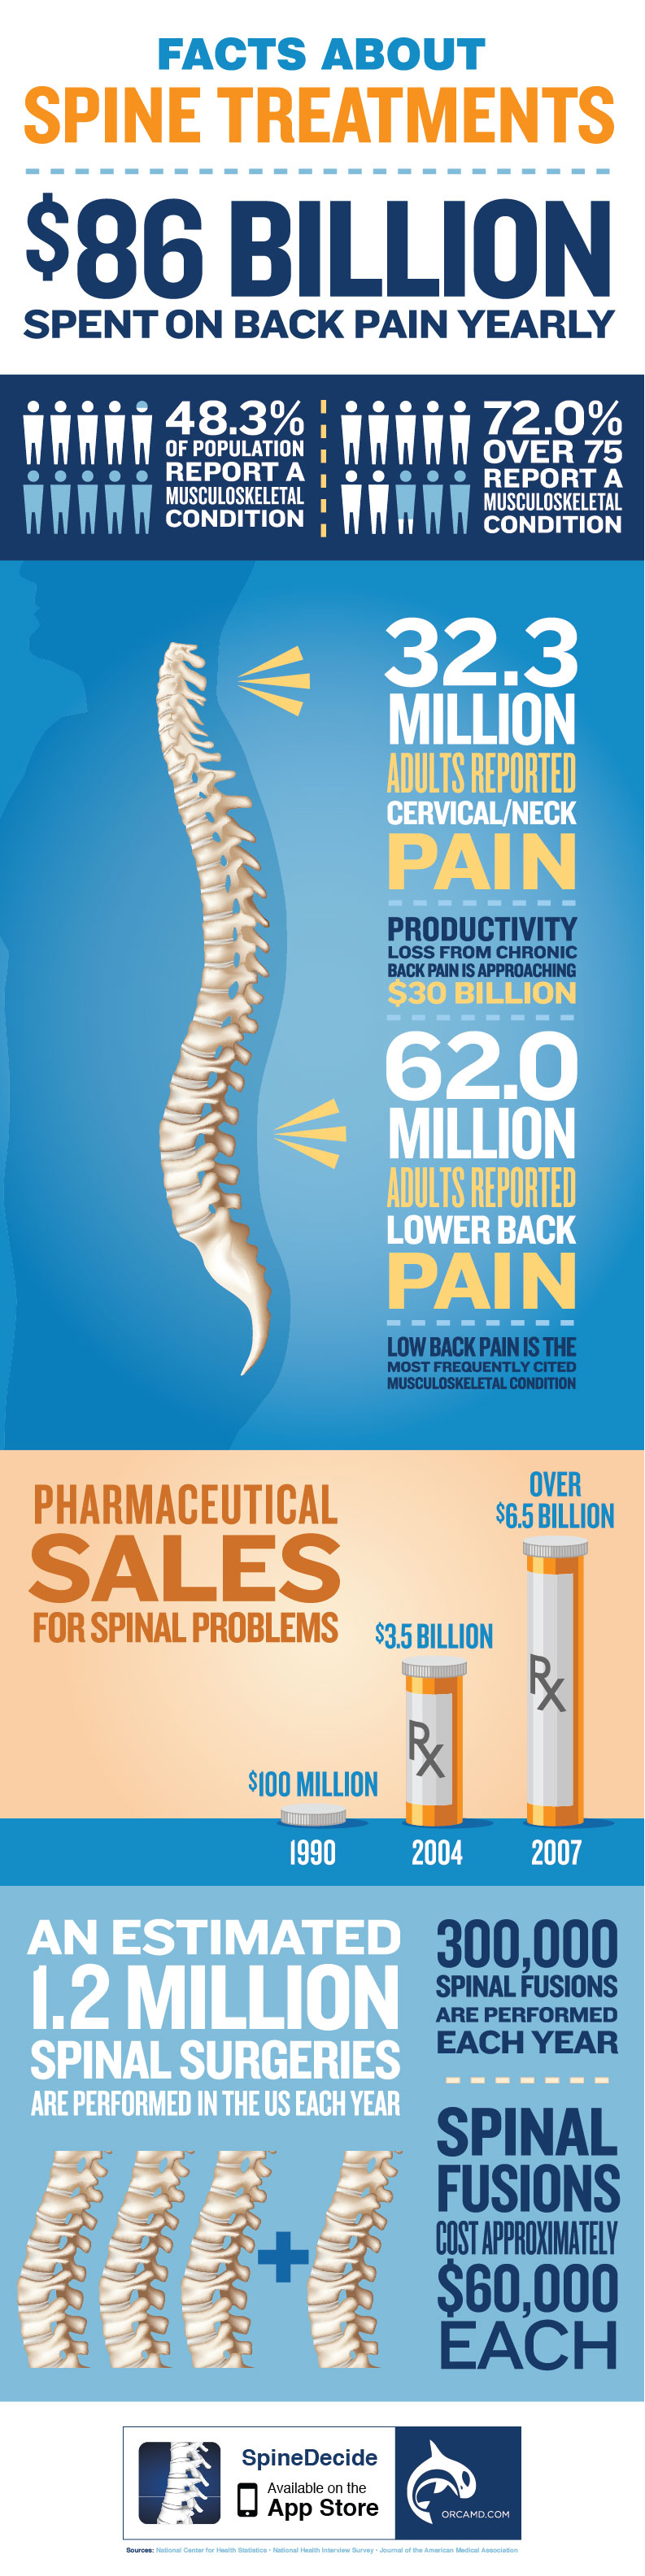 Spine Treatment Facts